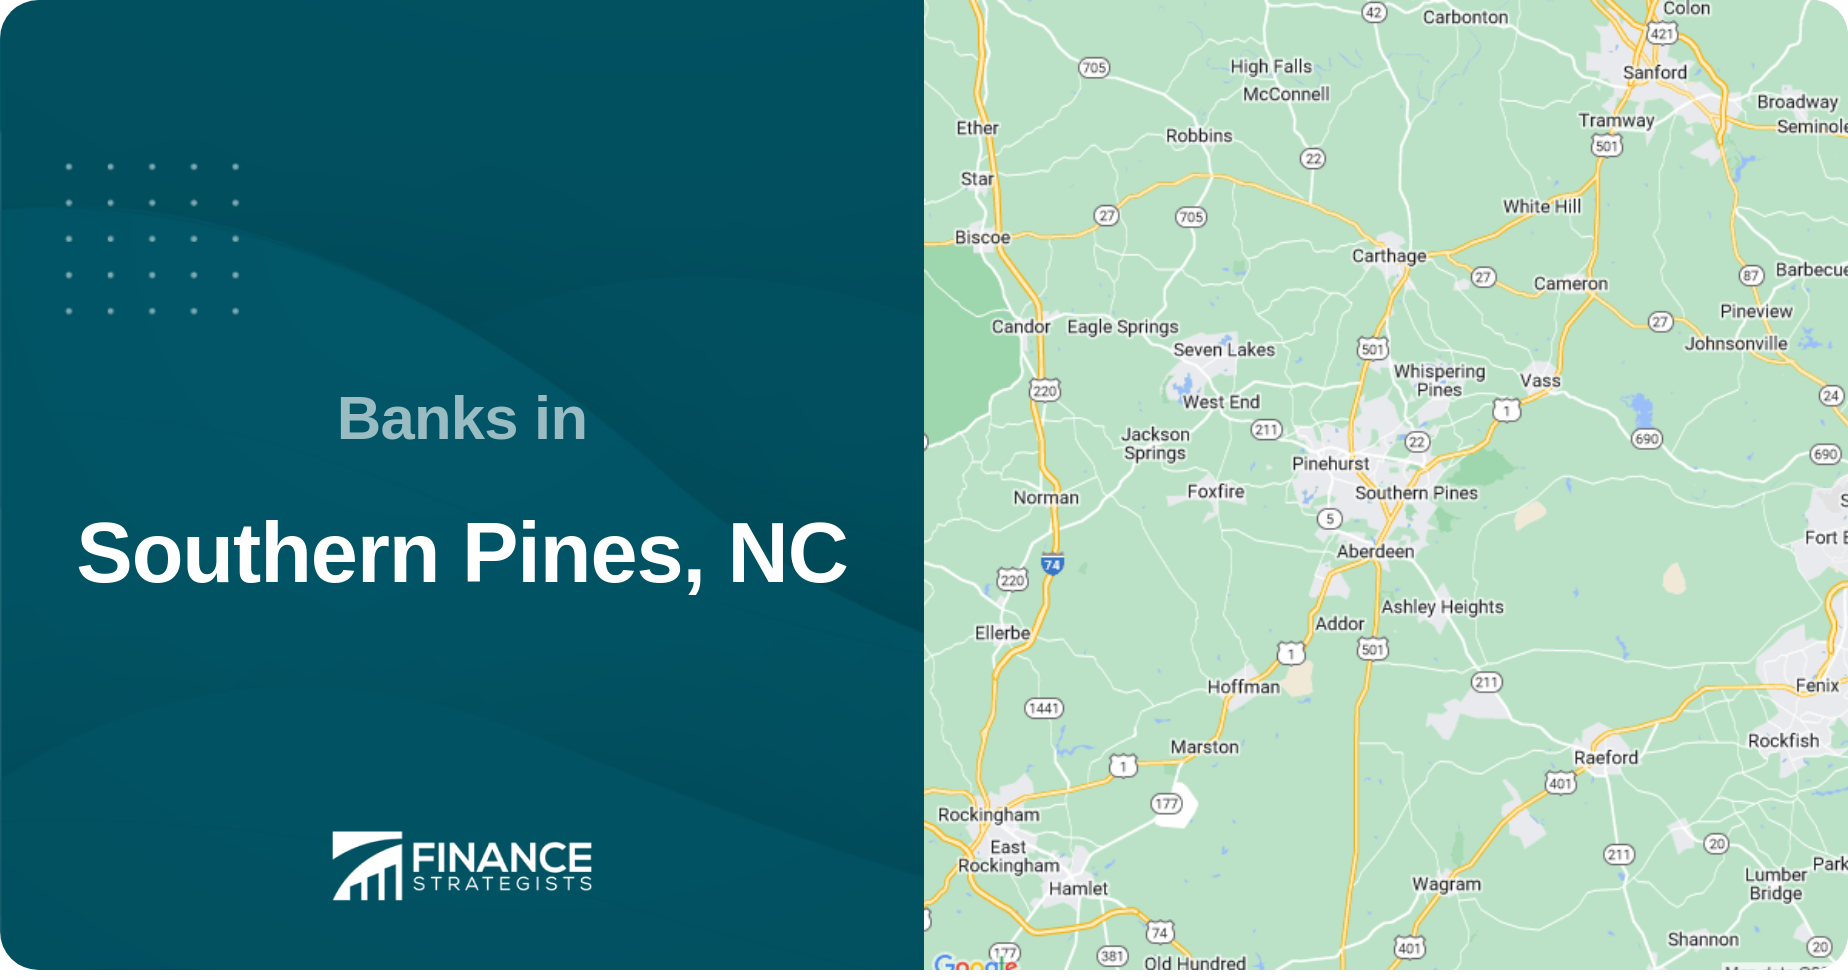 Image of Southern Pines, NC